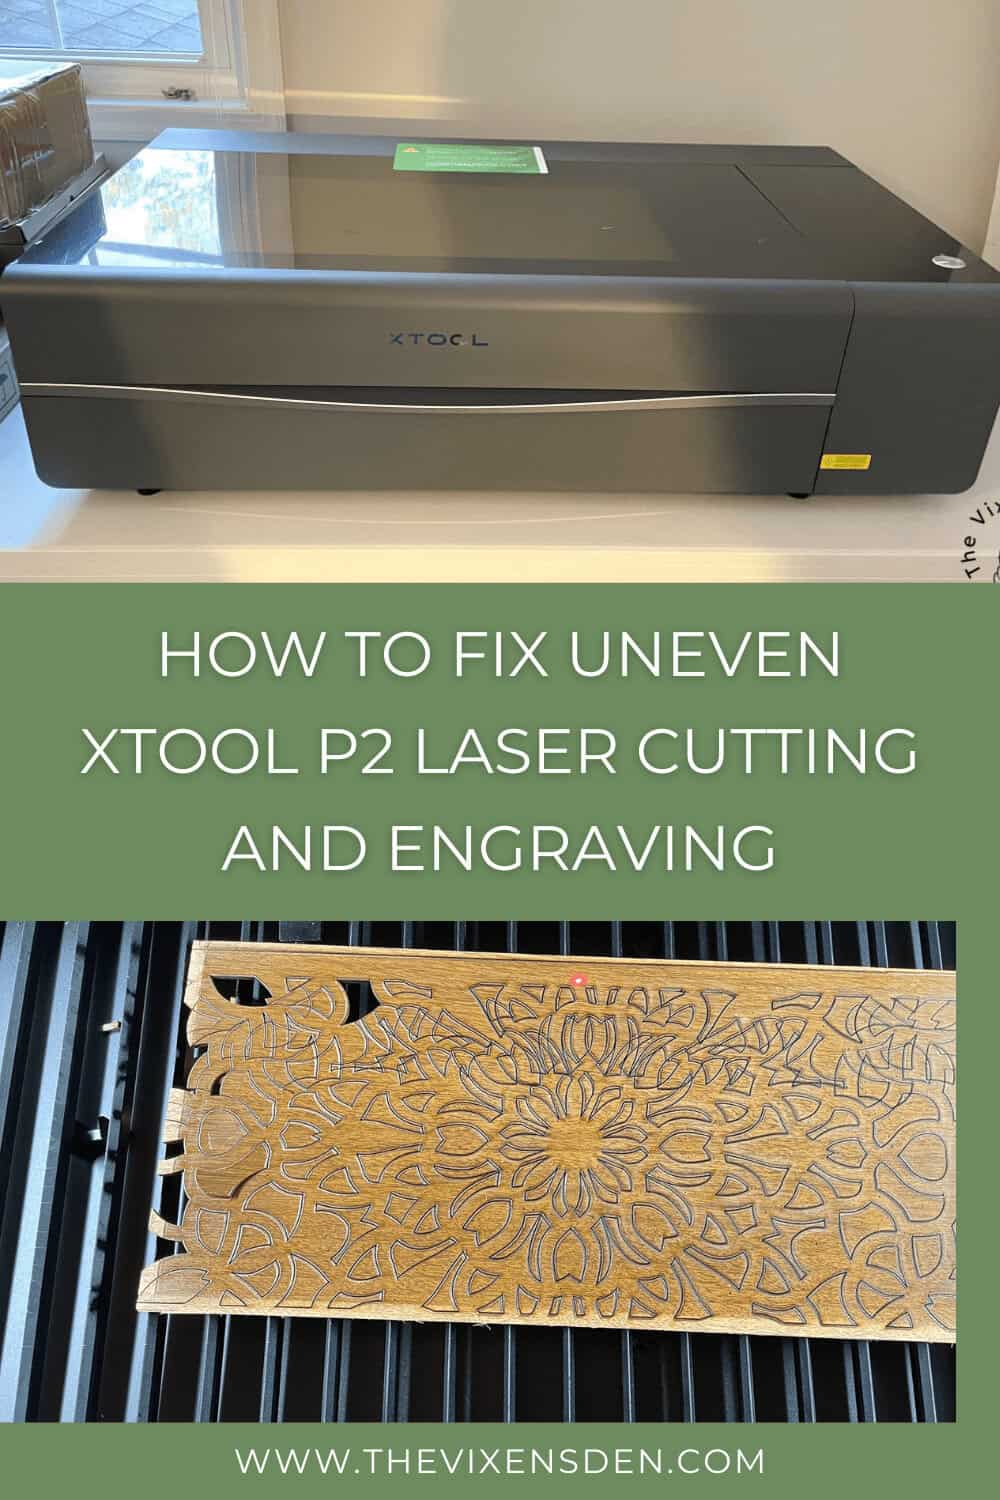 How to Fix Uneven xTool P2 Laser Cutting and Engraving